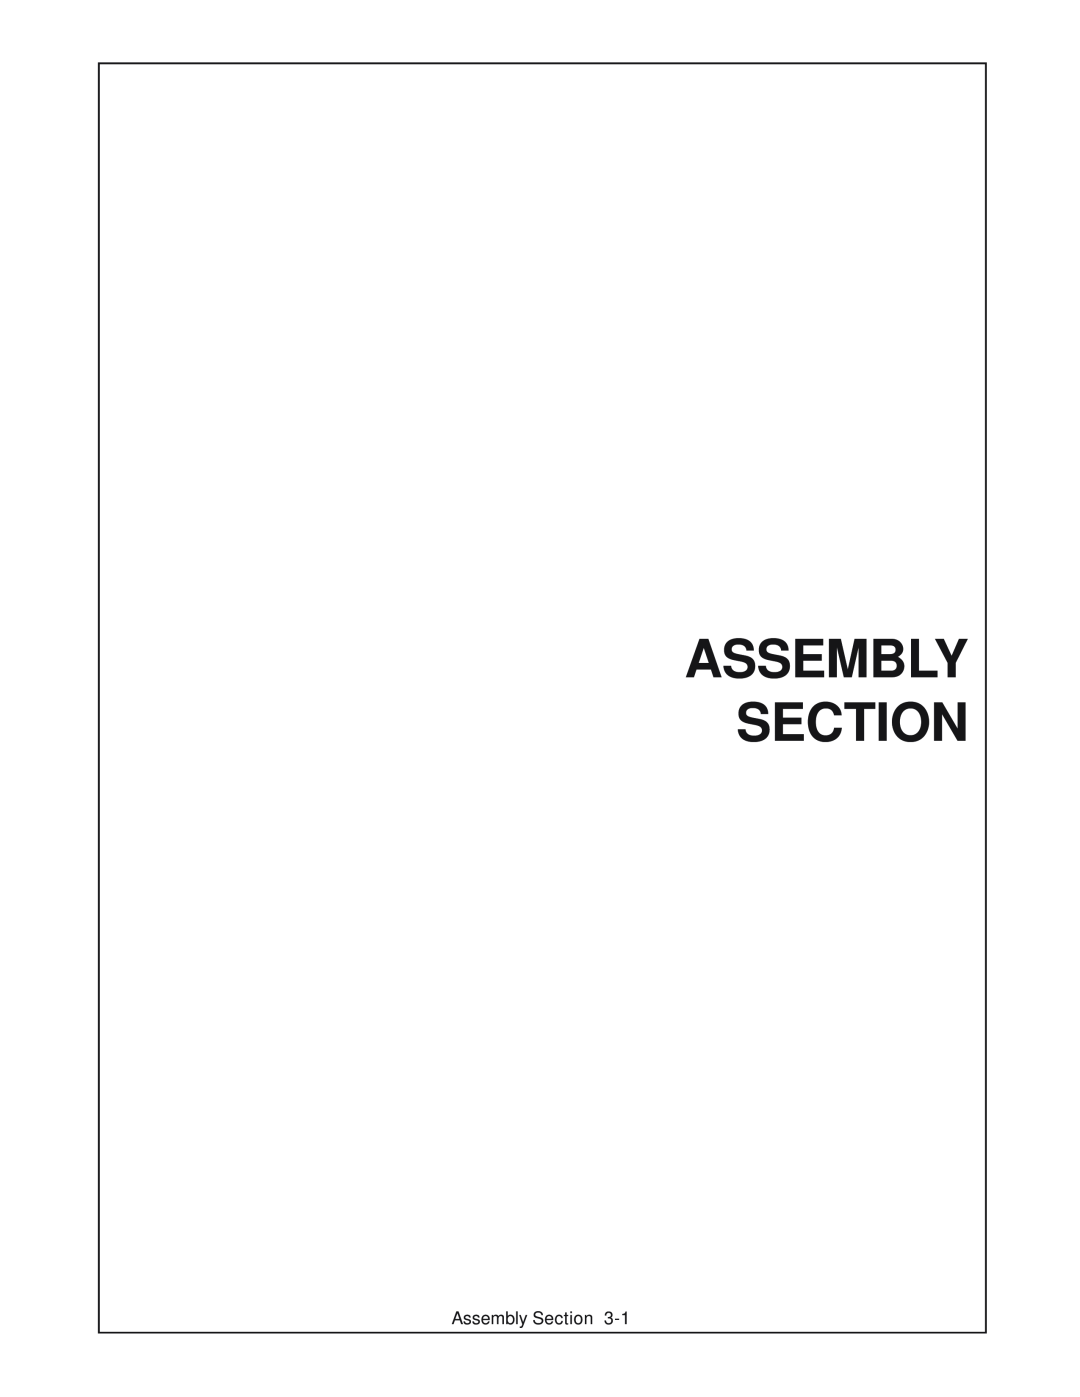 Grizzly 52 manual Assembly Section 